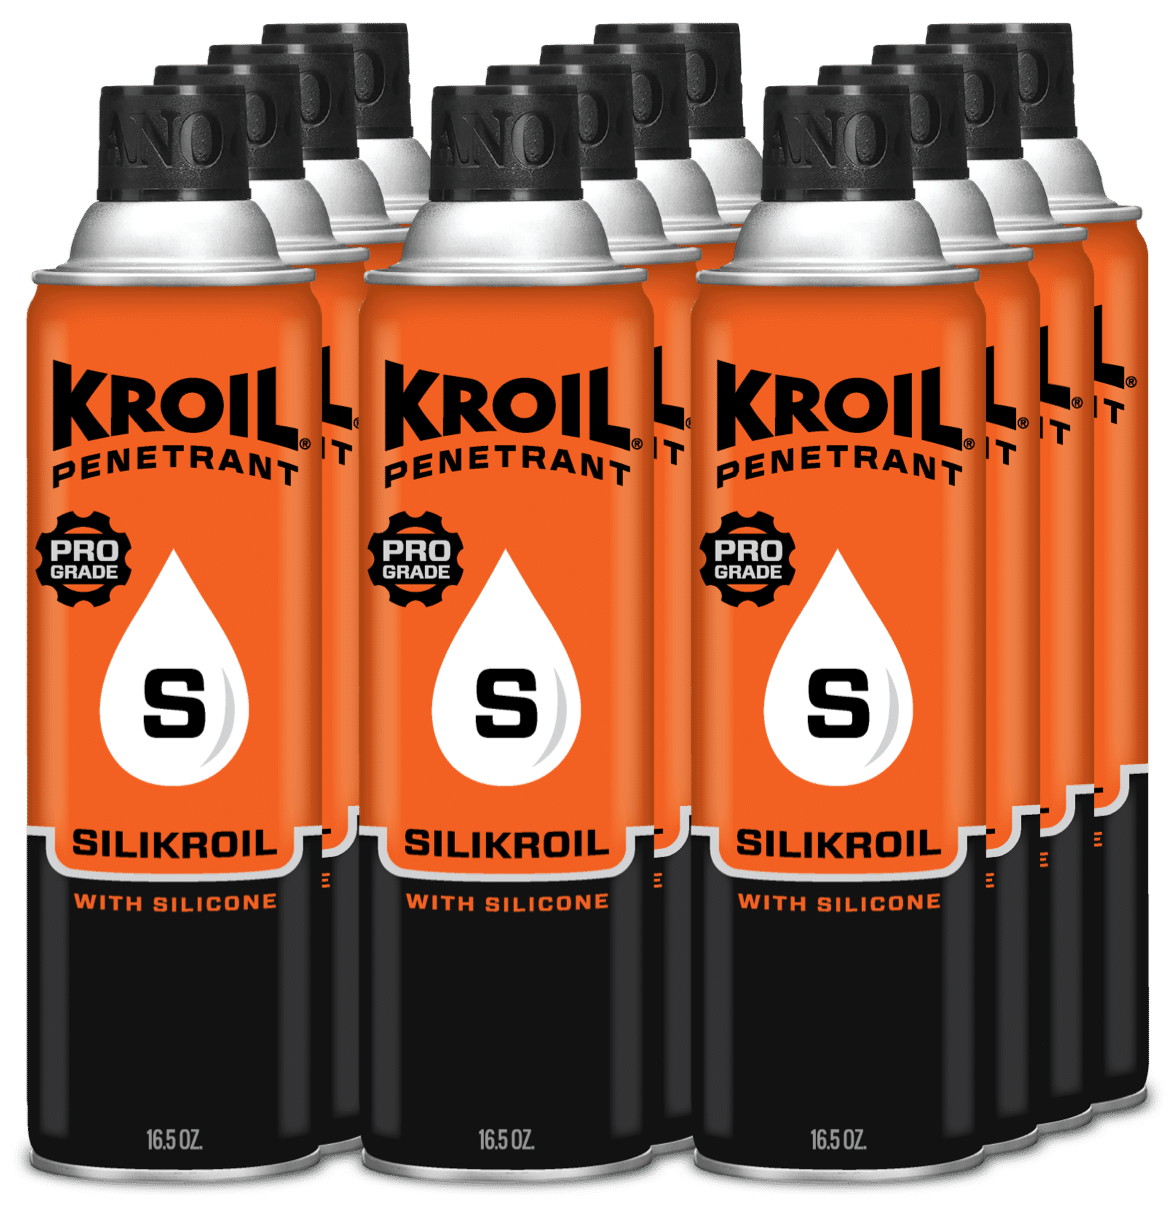 Silikroil, Kroil Penetrant With Silicone Aerosol - 16.5 Oz Can (Case of 12)